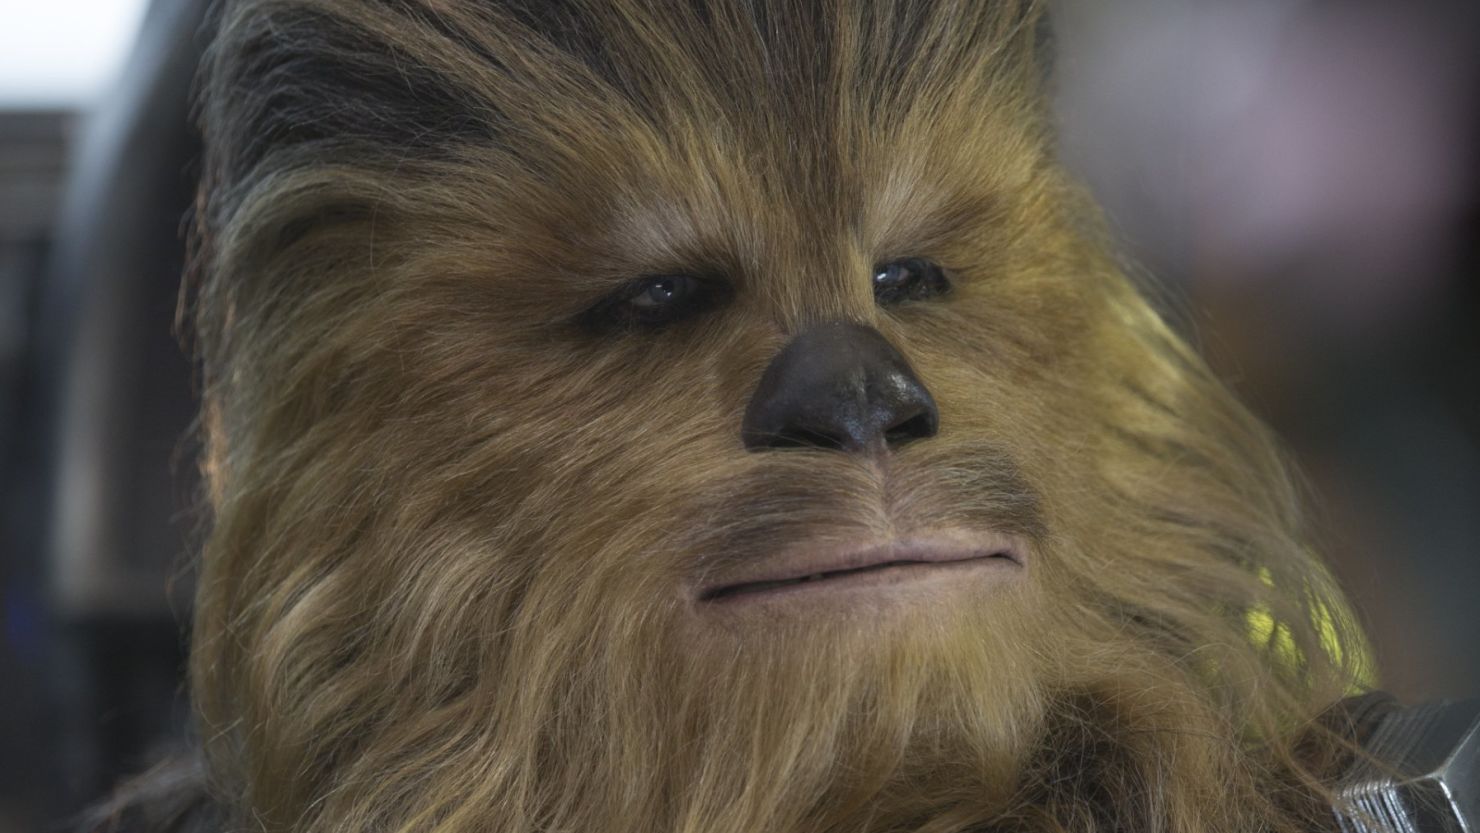 Chewbacca approves of this video (literally!). 